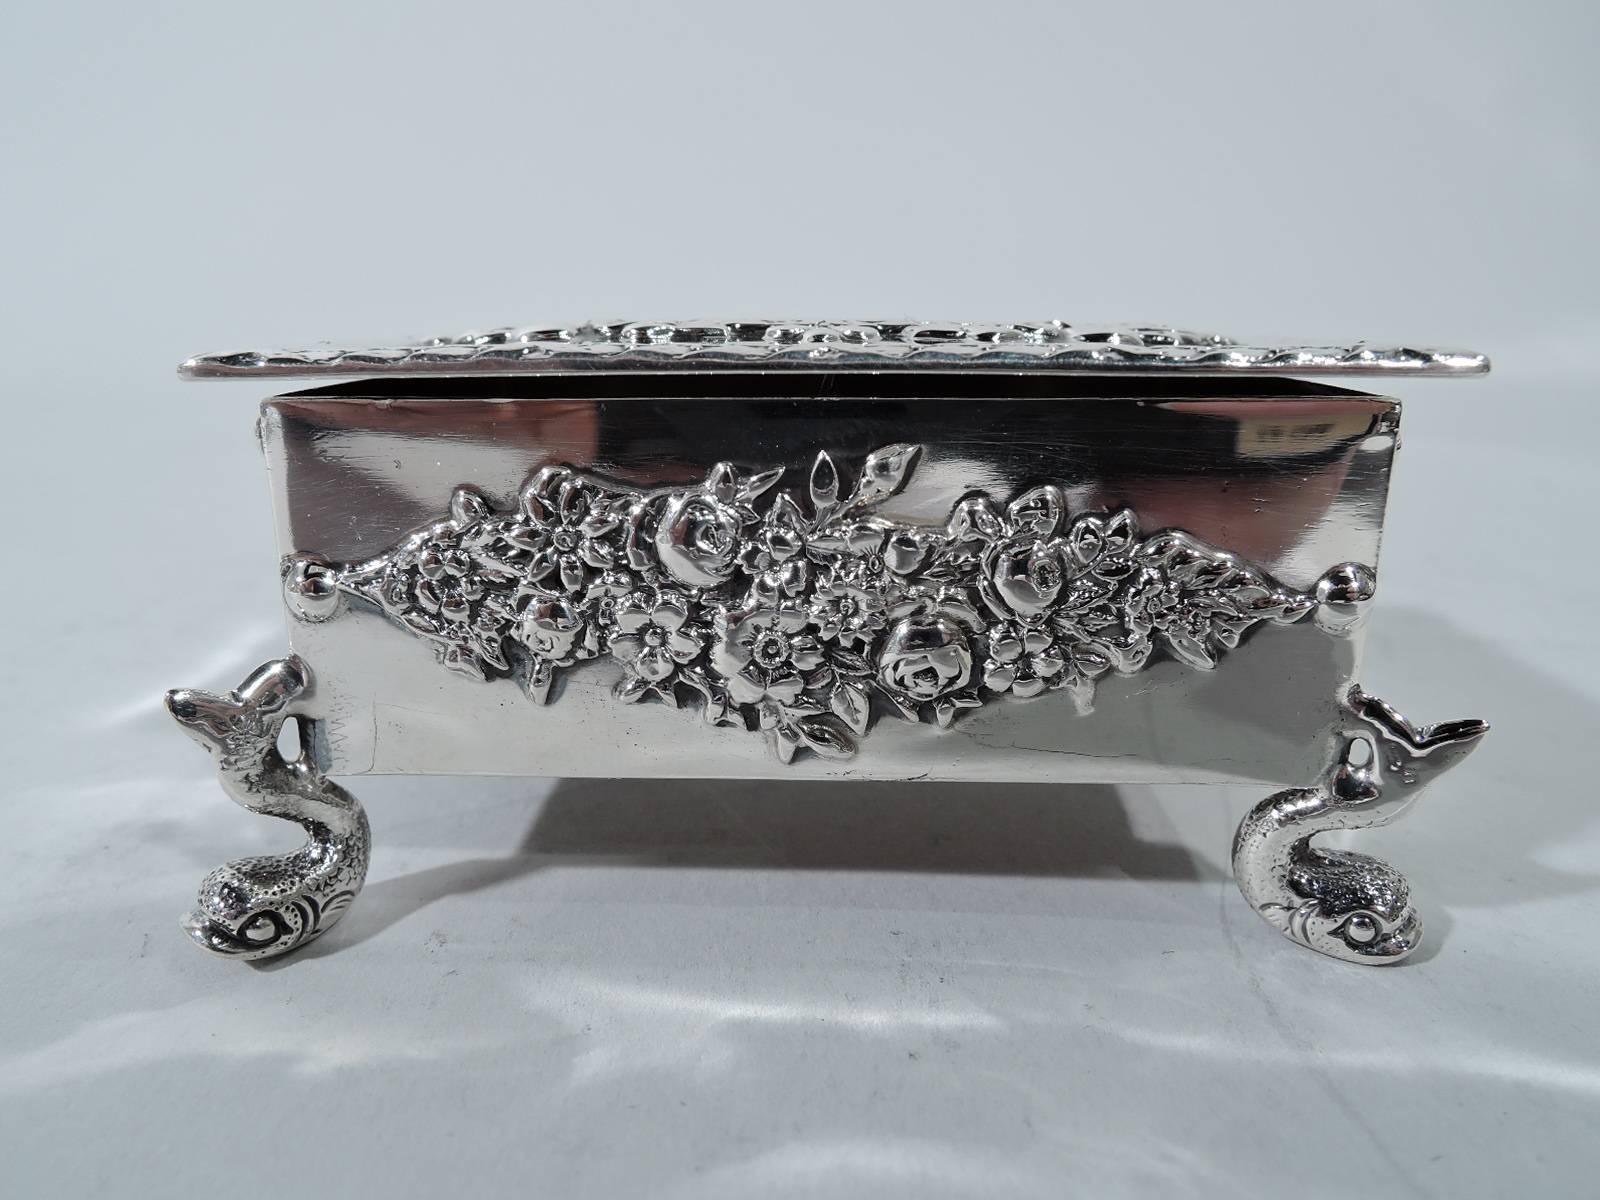 Pretty sterling silver postage stamp box. Made by Durgin (late part of Gorham) on Concord, New Hampshire, circa 1890. Rectangular with straight sides and flat hinged cover. Box interior gilt and partitioned with curved bottom. Applied ornament: